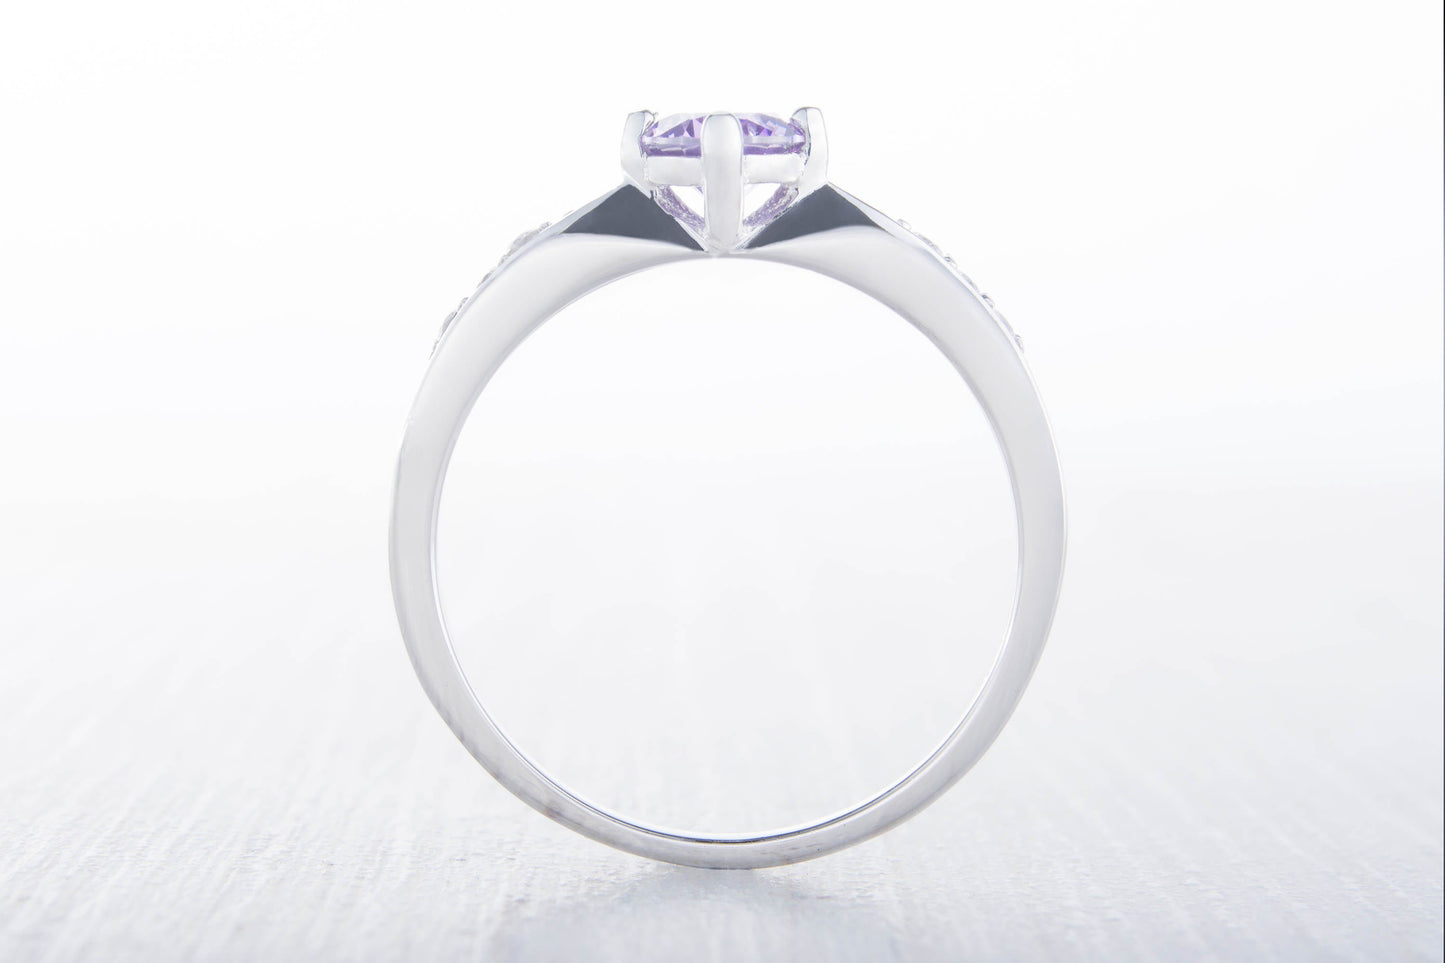 Natural Amethyst Solitaire engagement ring - available in Sterling Silver  or white gold - handmade